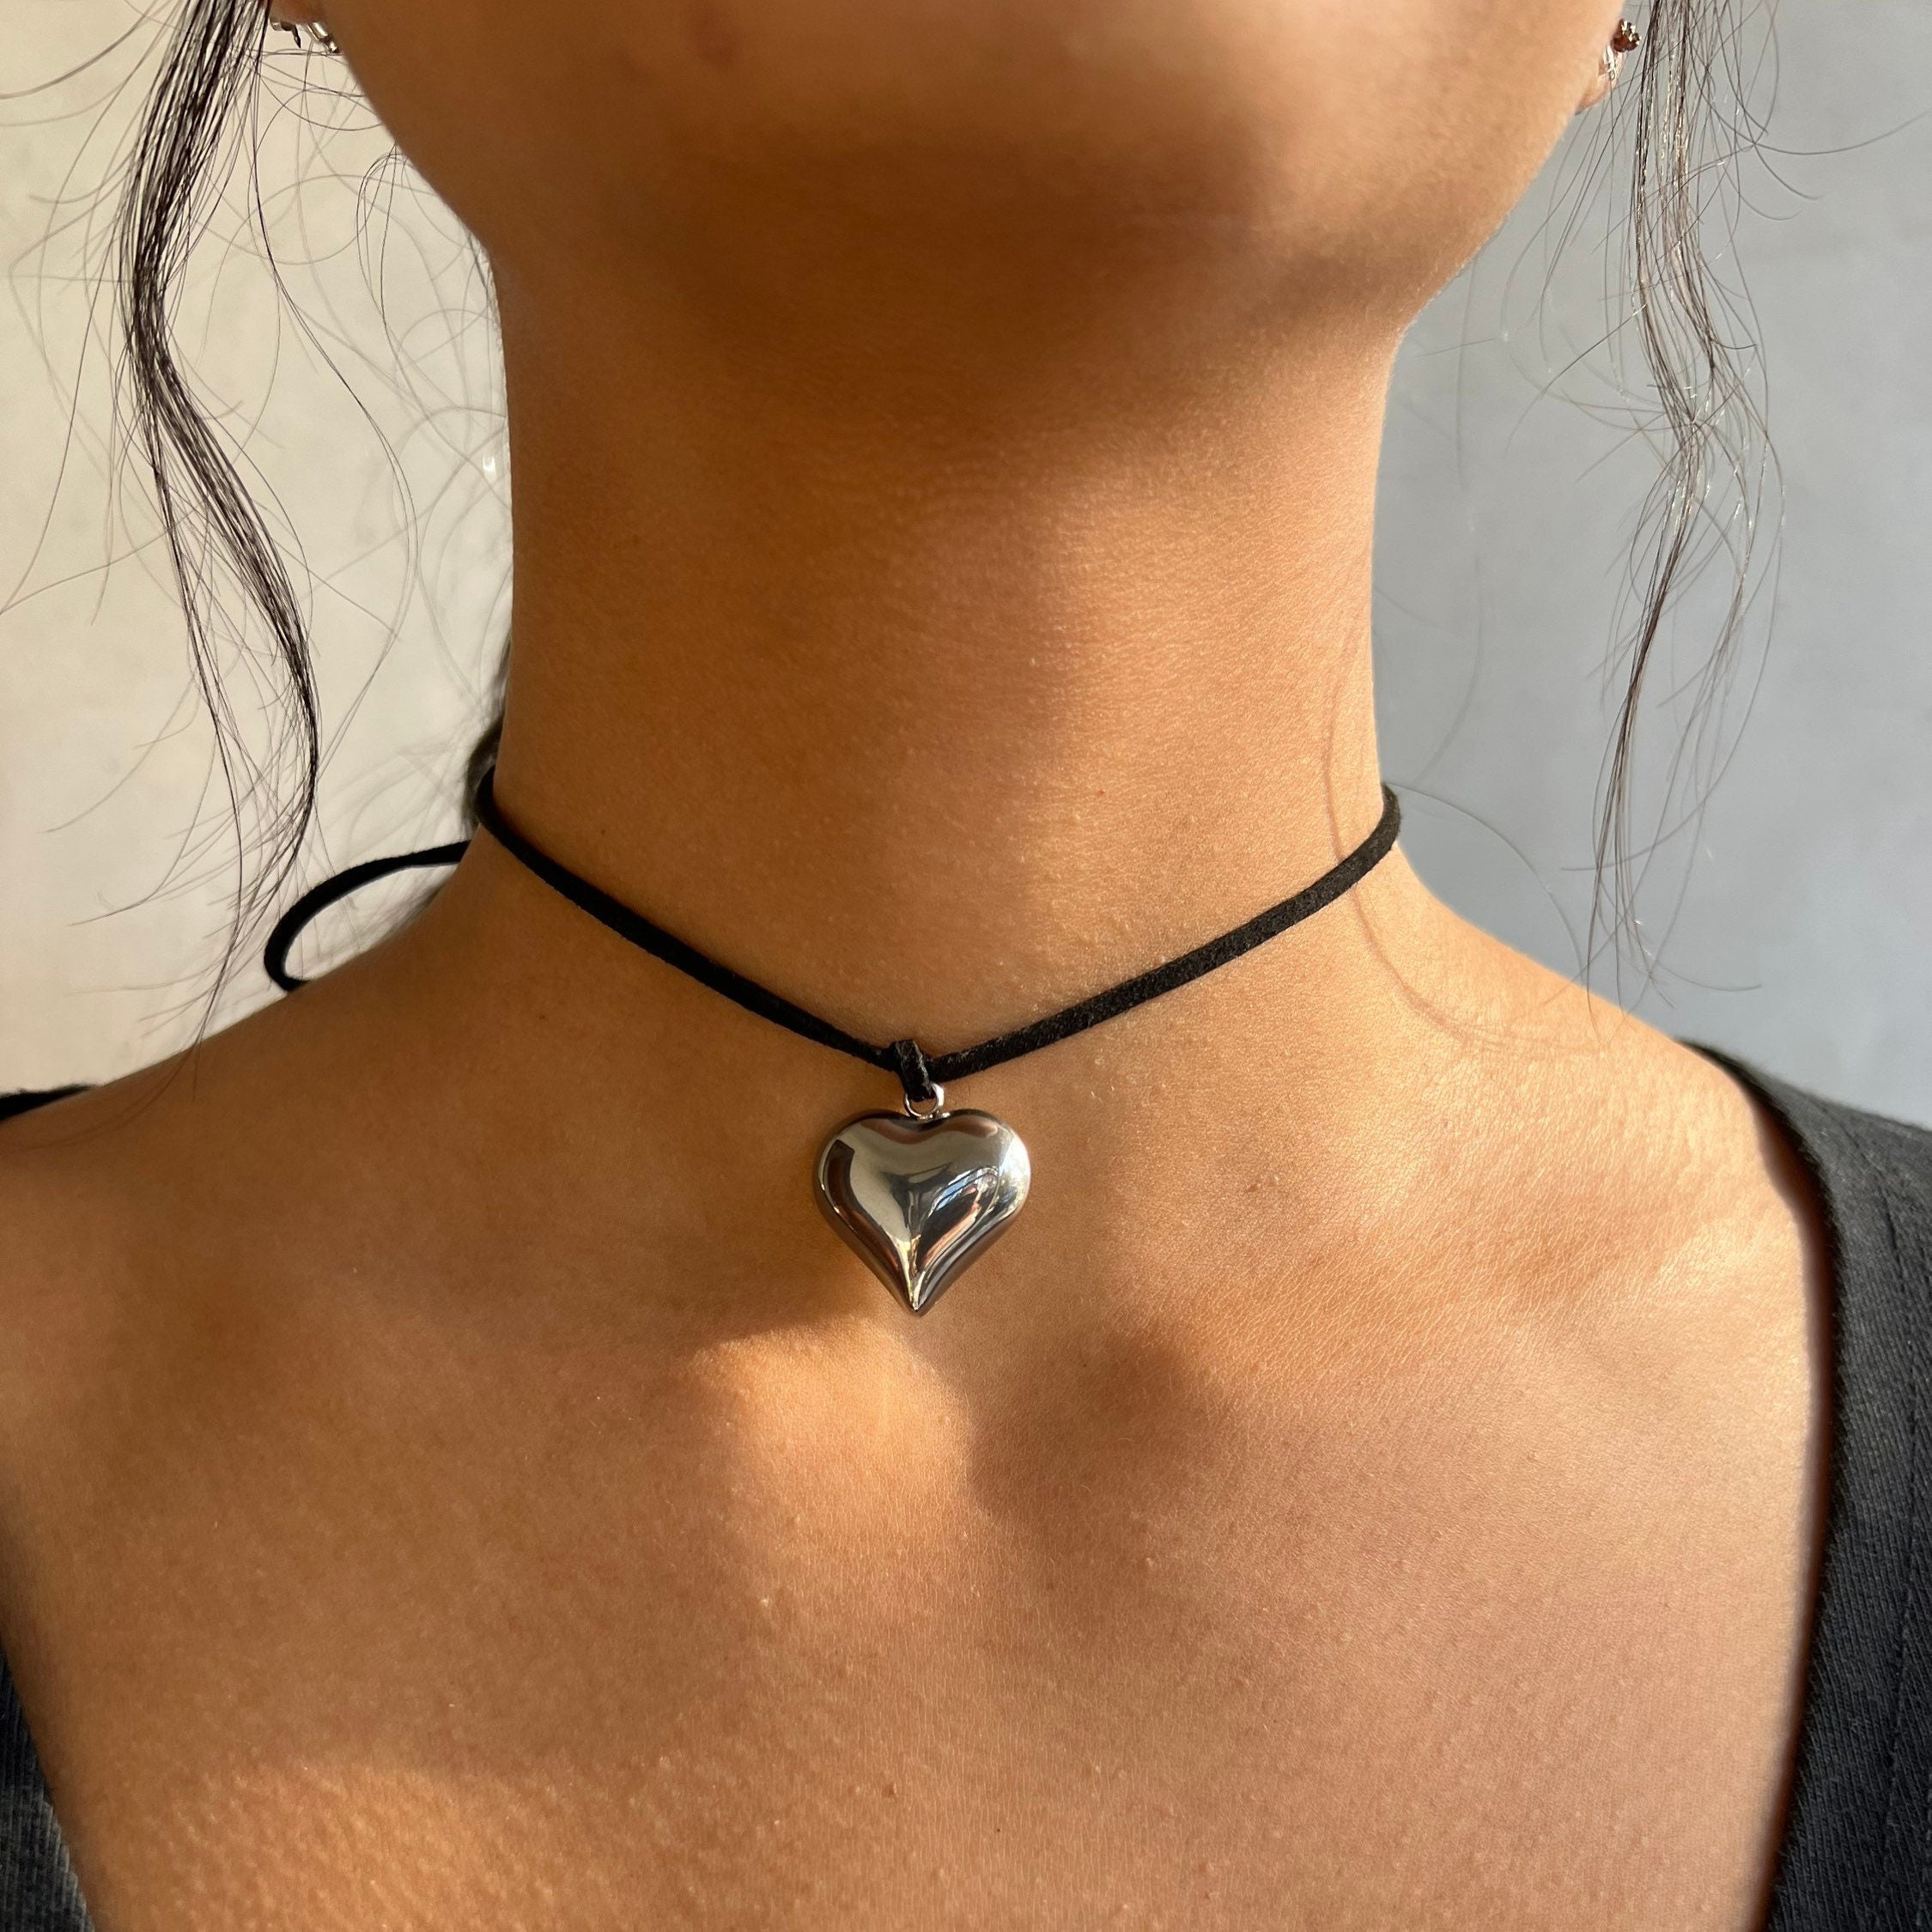 black choker necklace with silver heart pendant by jkfangirl on